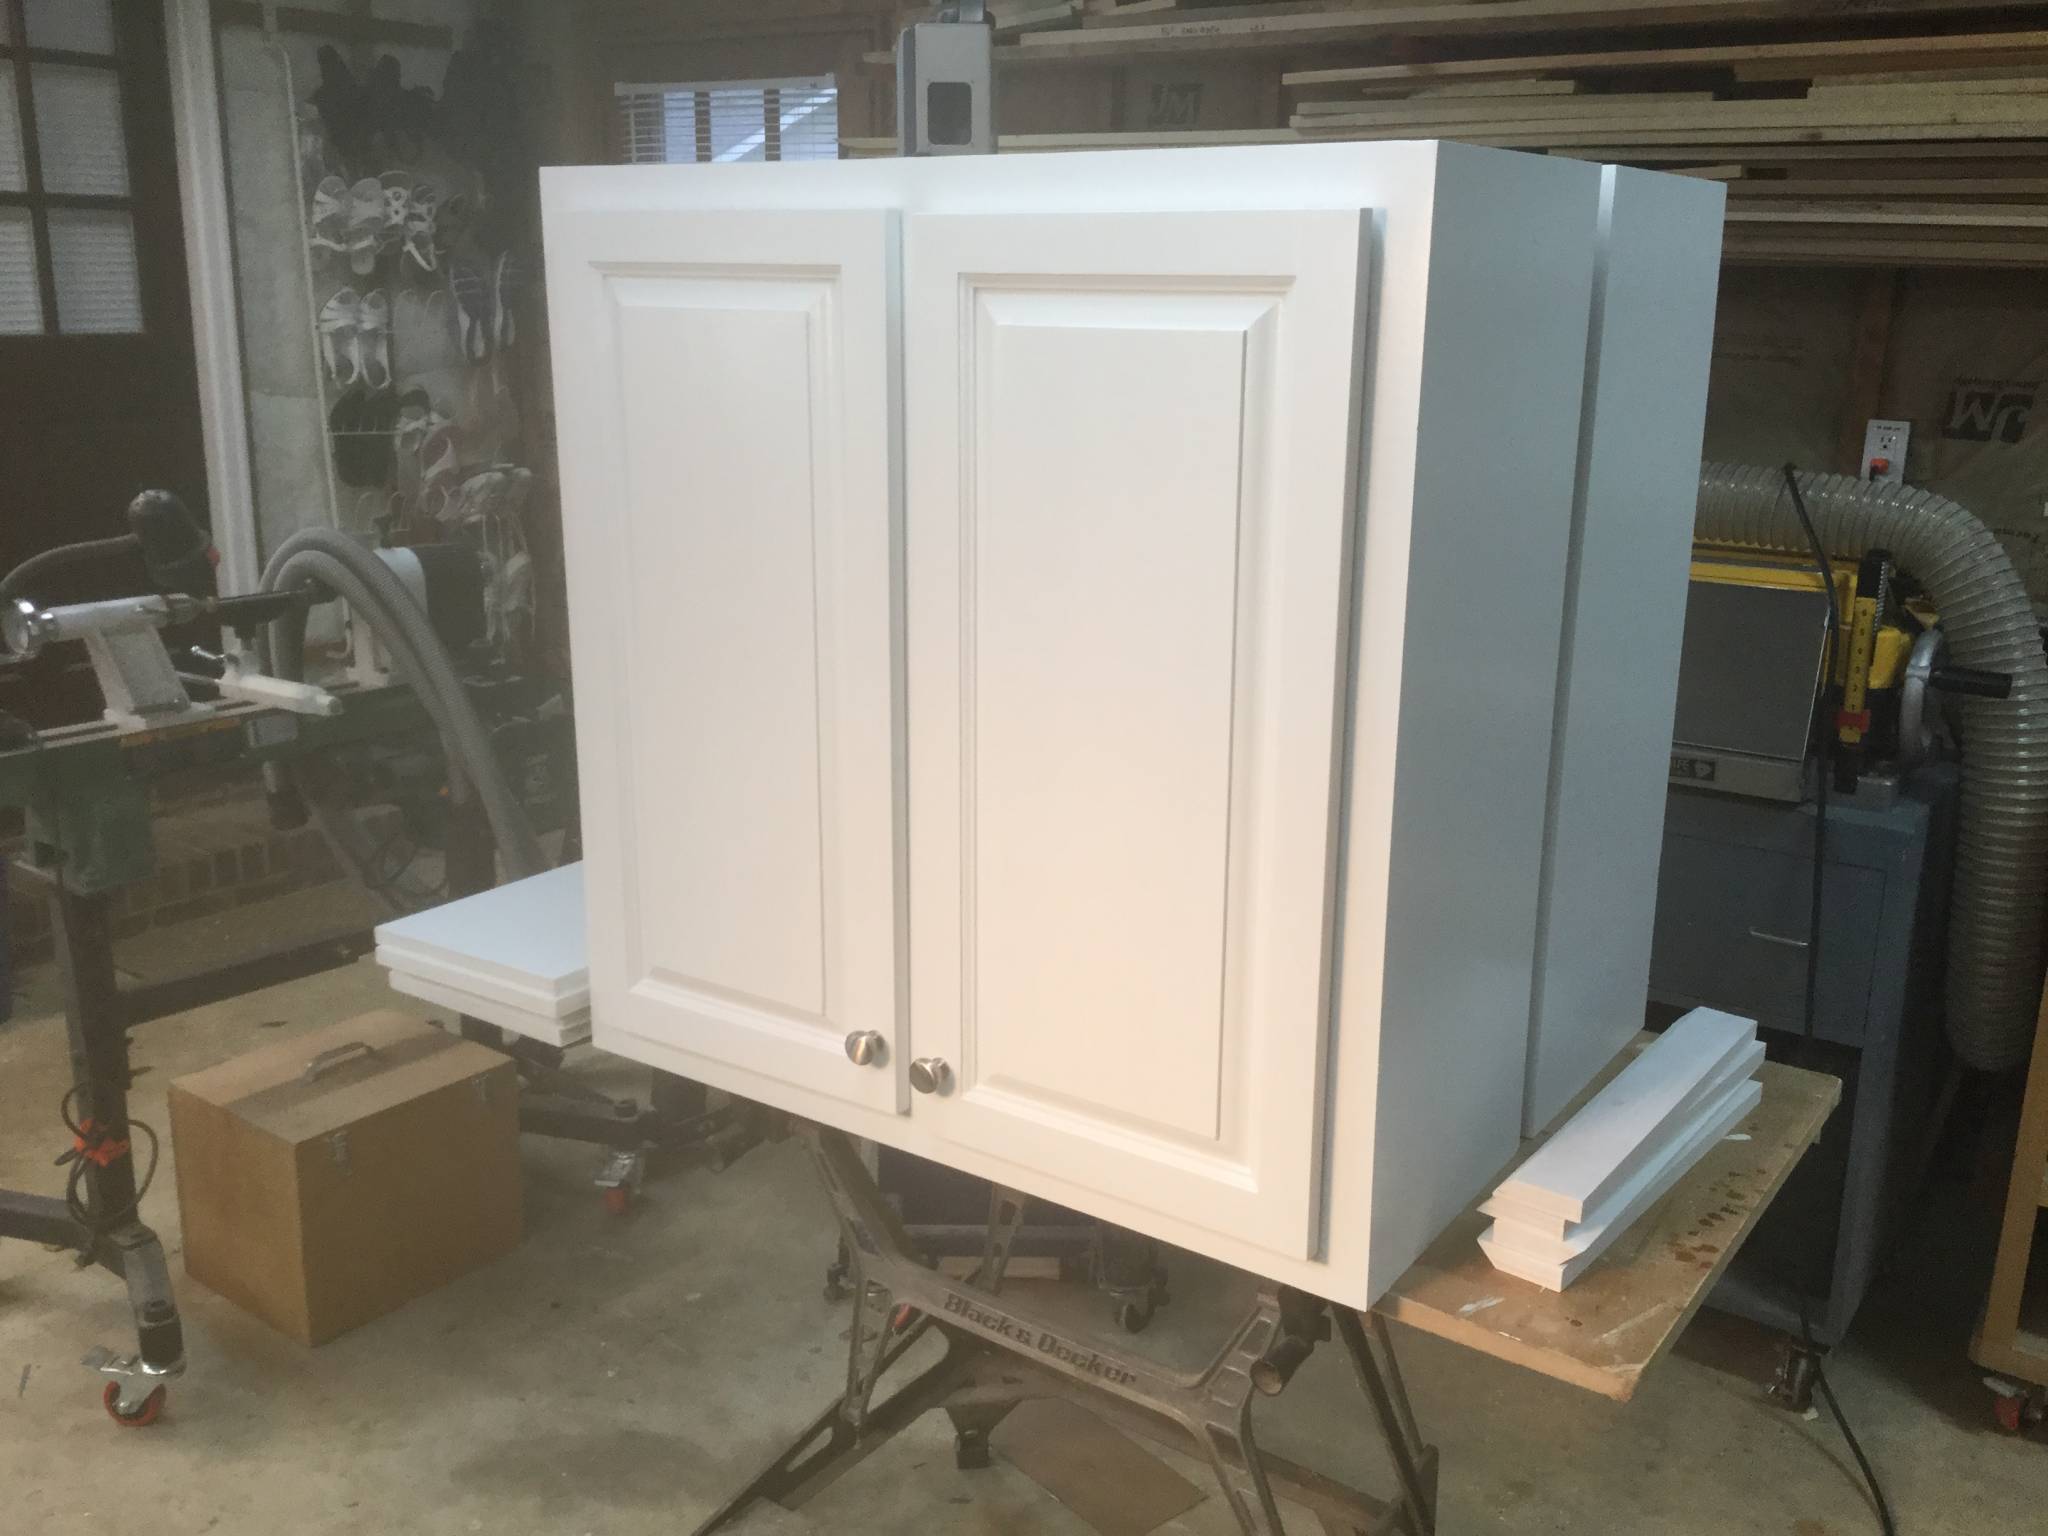 Laundry Room Cabinets - 2